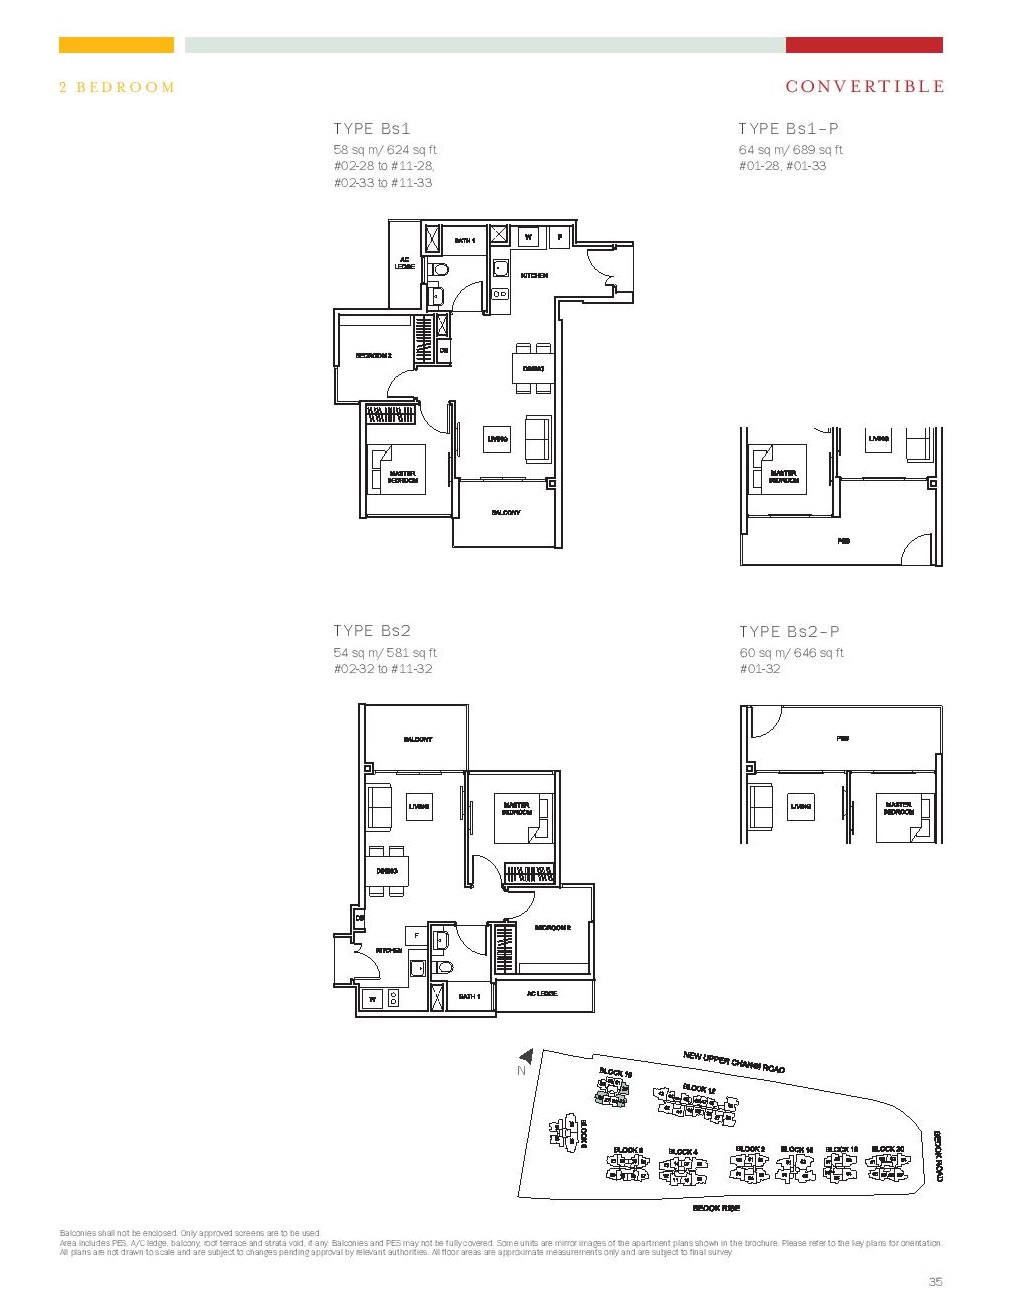 The Glades @ Tanah Merah 2 Bedroom Convertible Floor Type Bs1, Bs2, Bs1-P, Bs2-P Plans